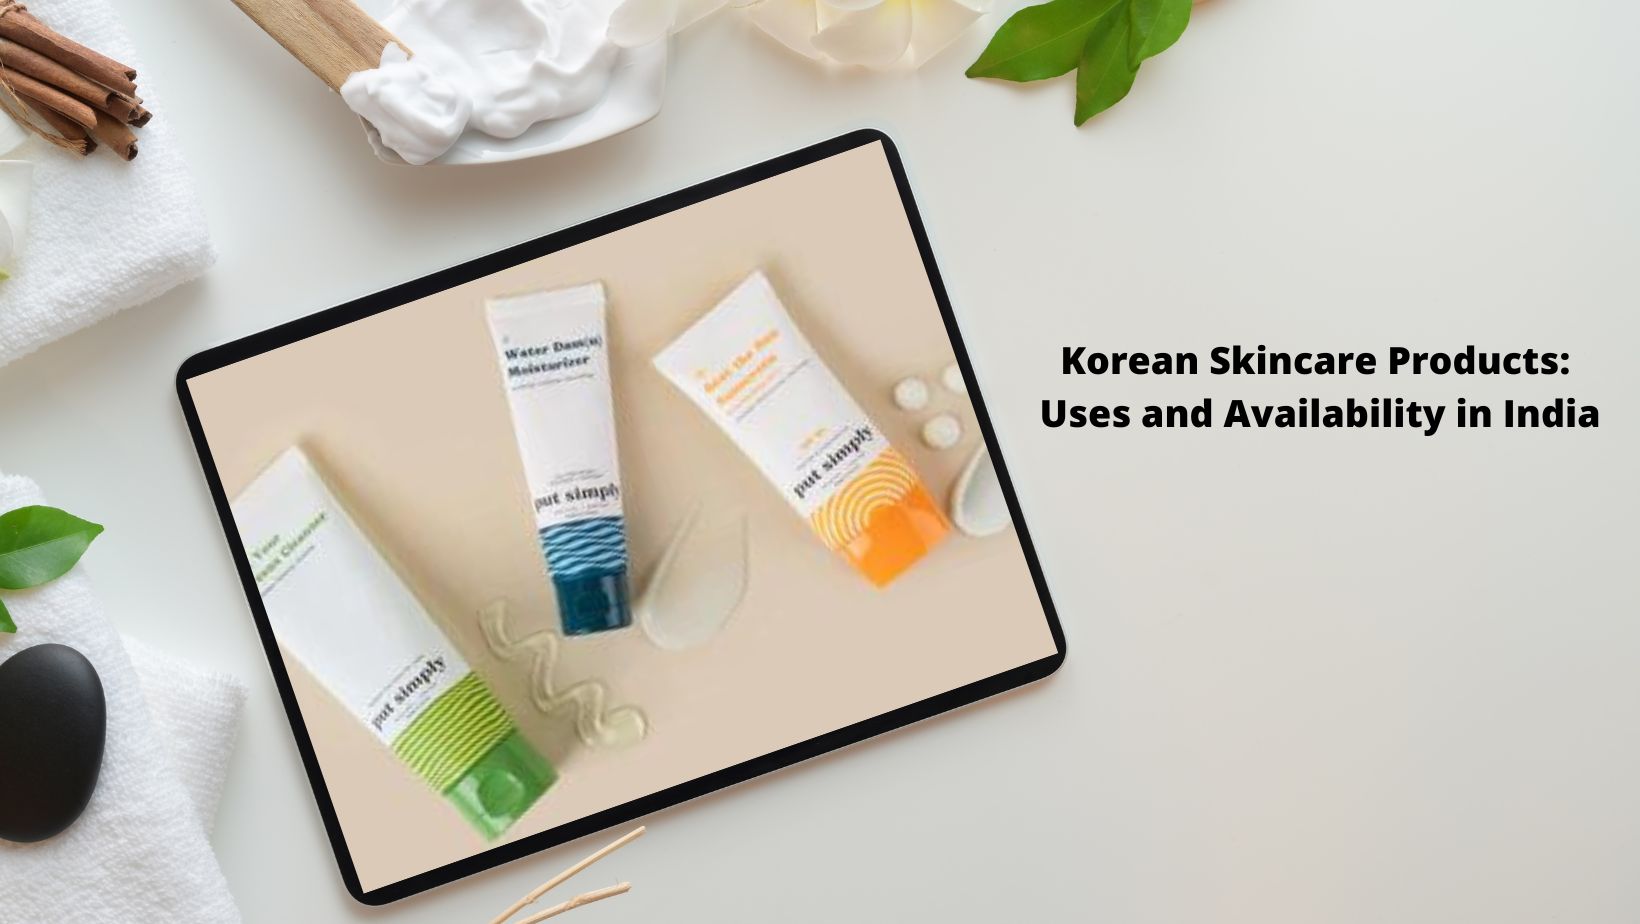 Korean Skincare Products: Uses and Availability in India